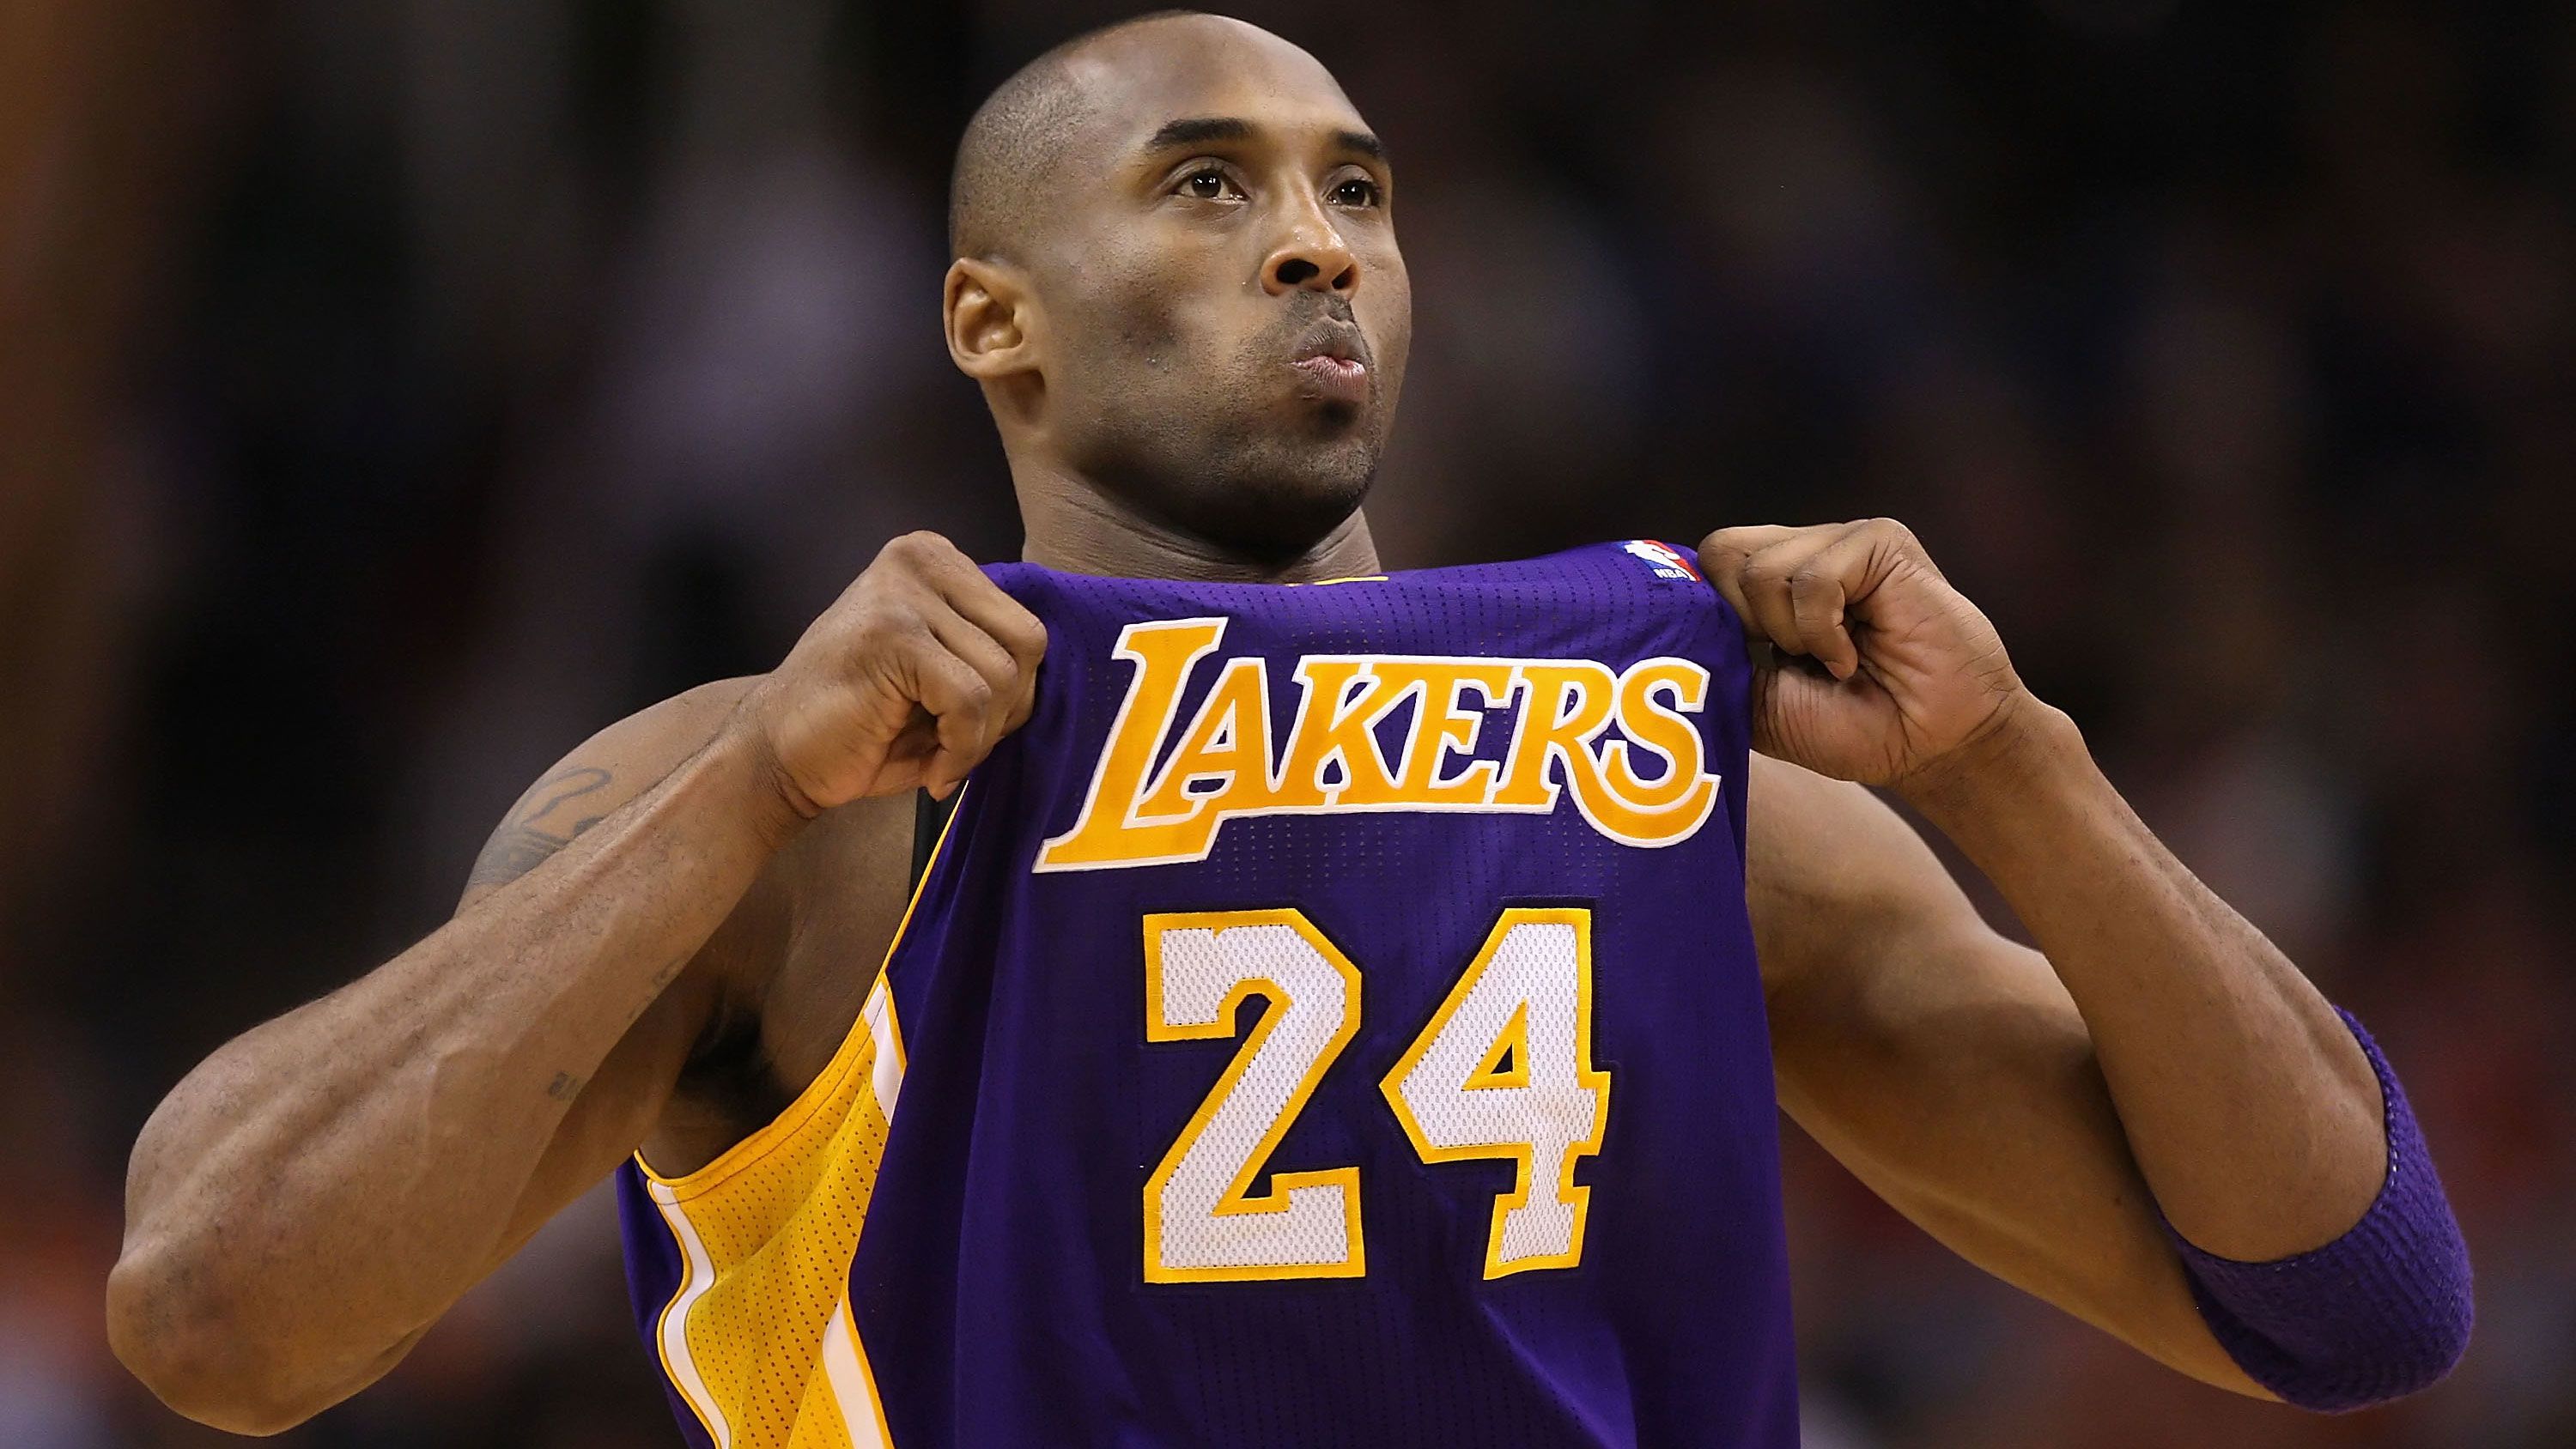 Basketball Forever - To honour the late legend Kobe Bryant for